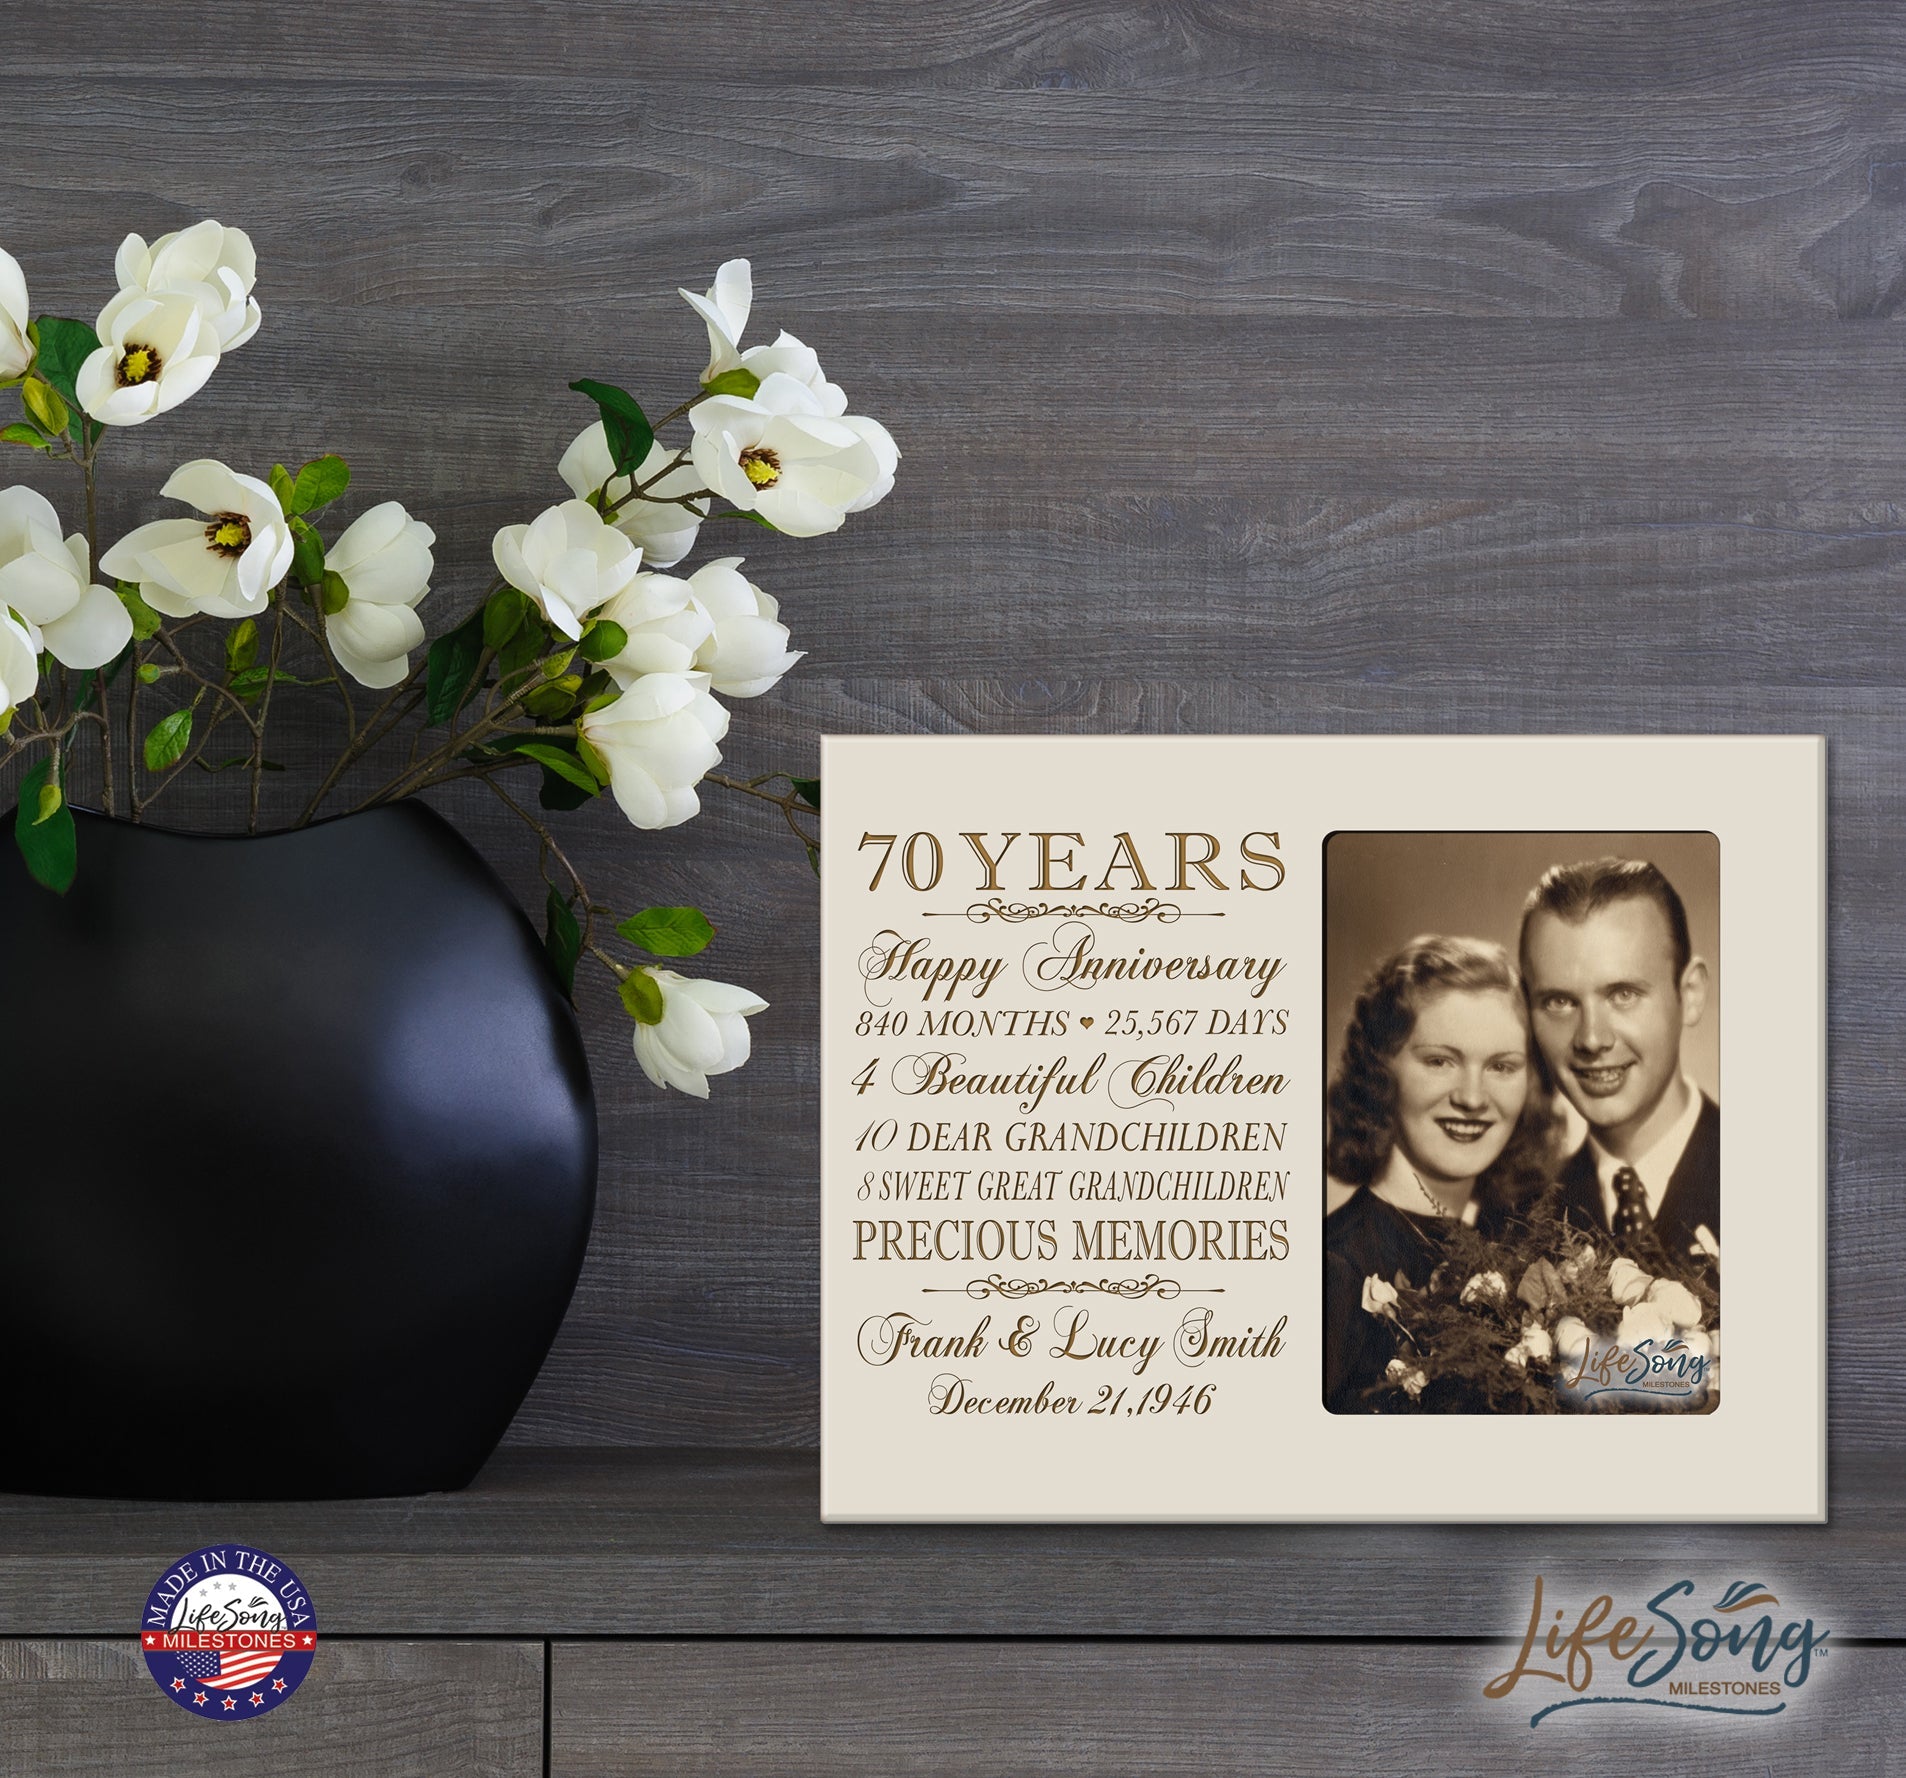 Personalized 70th Wedding Anniversary Picture Frame Gifts for Couples - Precious Memories - LifeSong Milestones